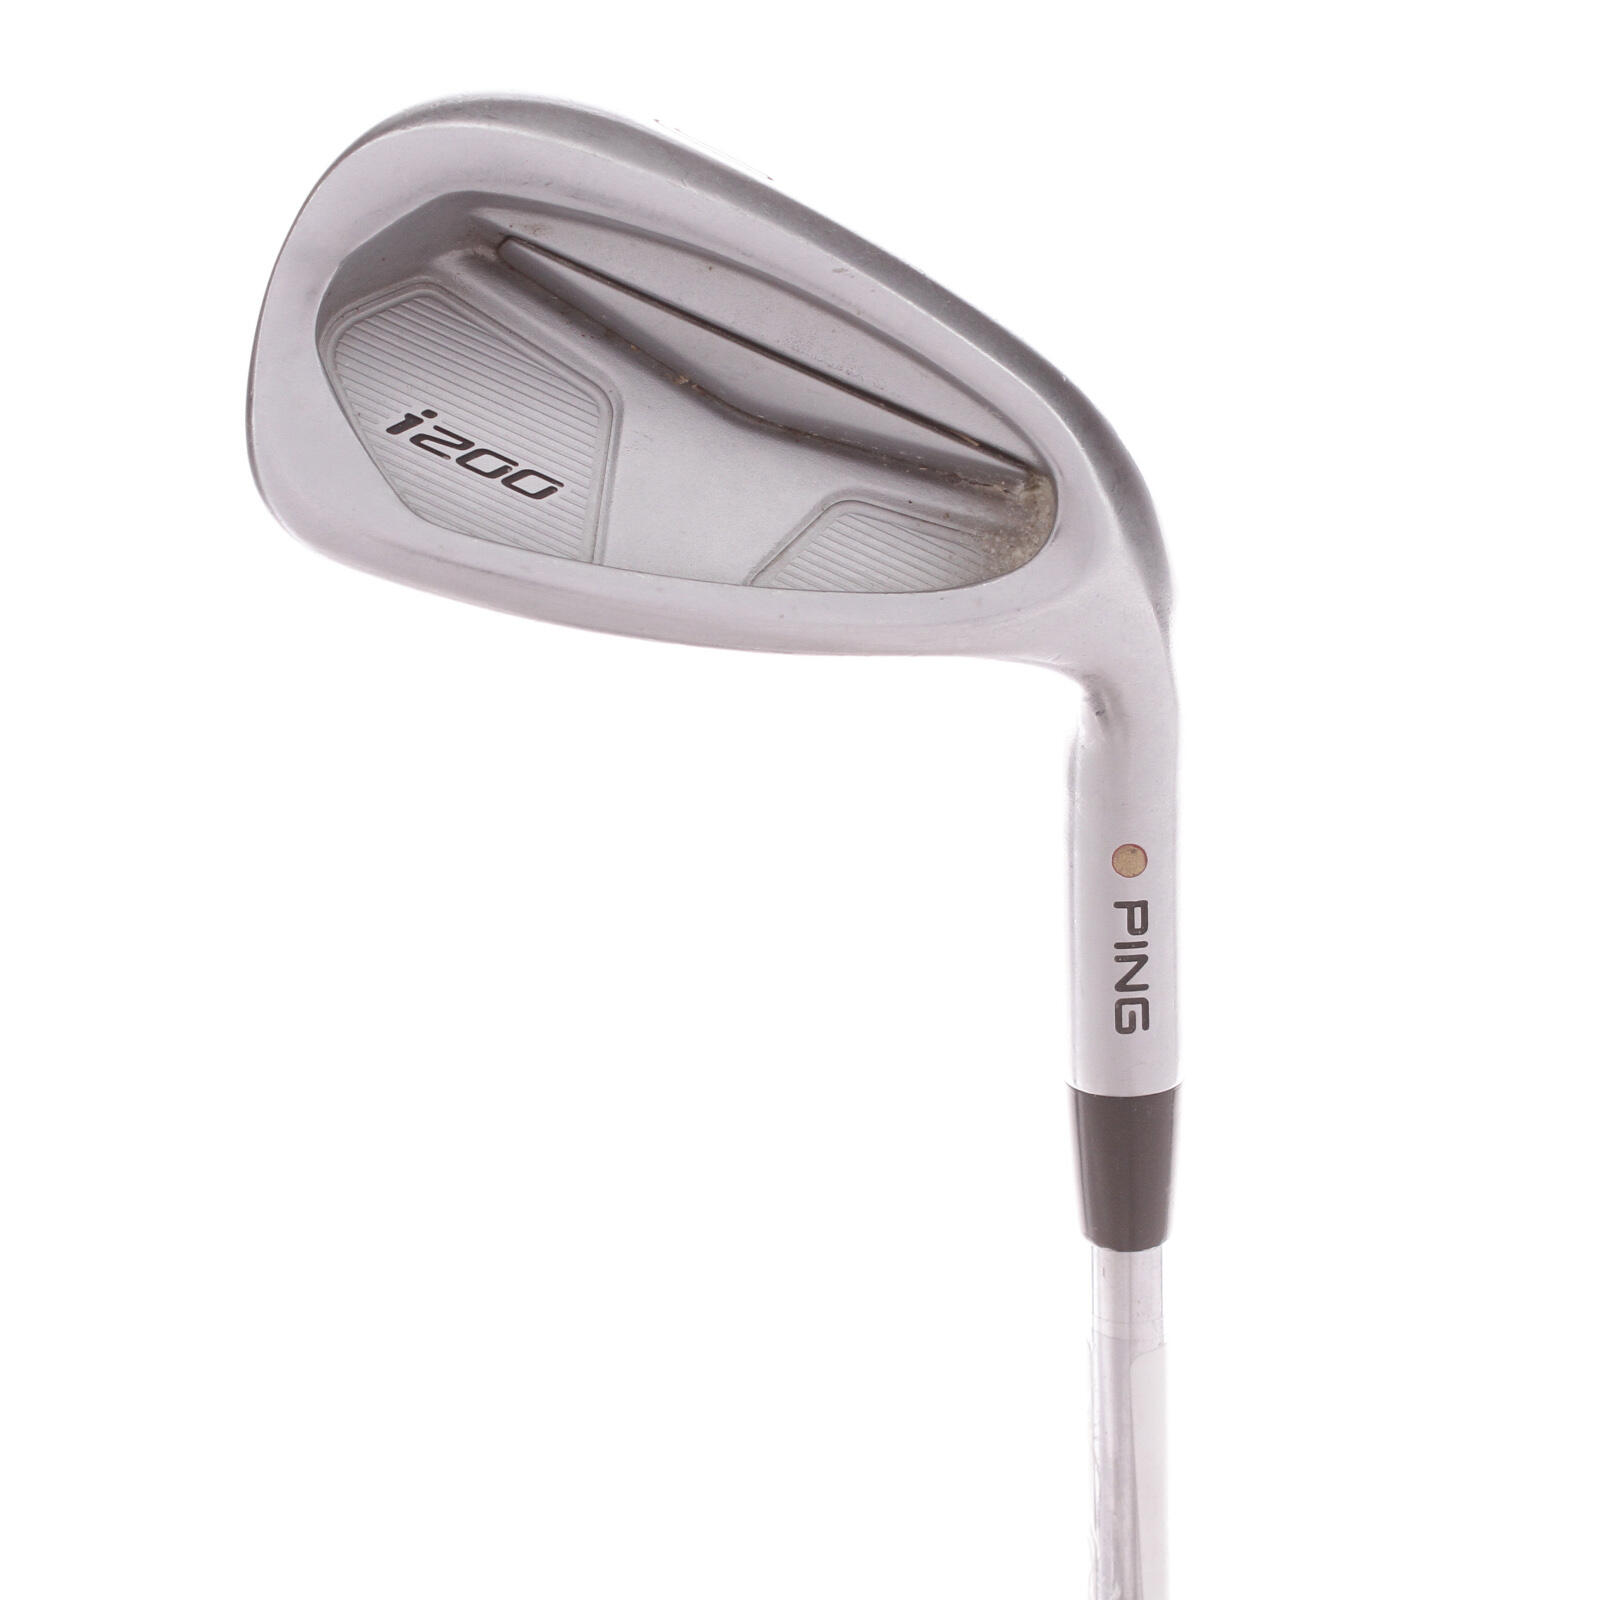 PING USED - Utility Wedge Ping i200 50* Steel Shaft Stiff Flex Right Handed - GRADE B